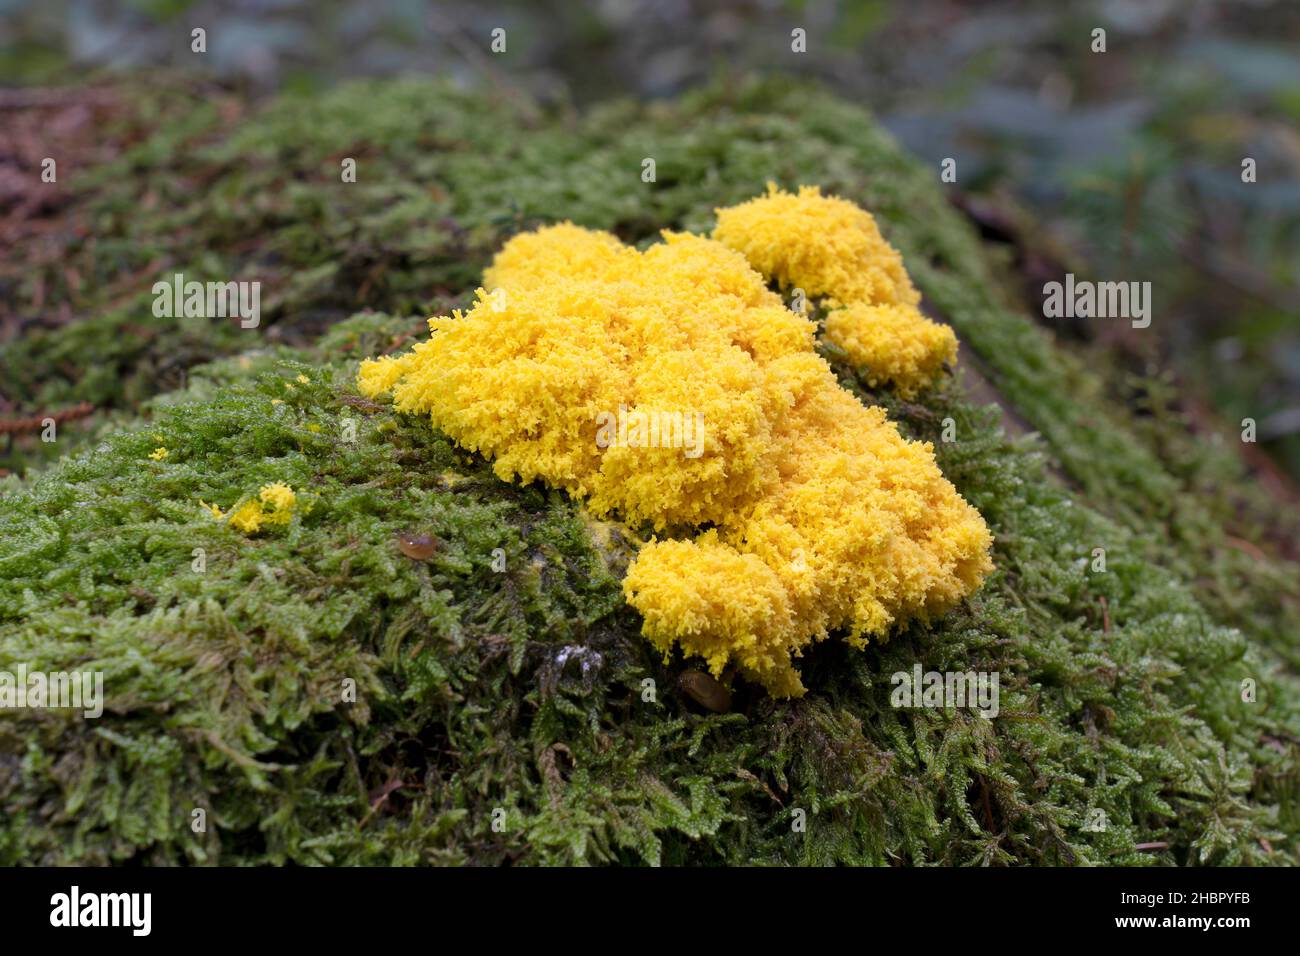 Lebewesen High Resolution Stock Photography and Images - Alamy